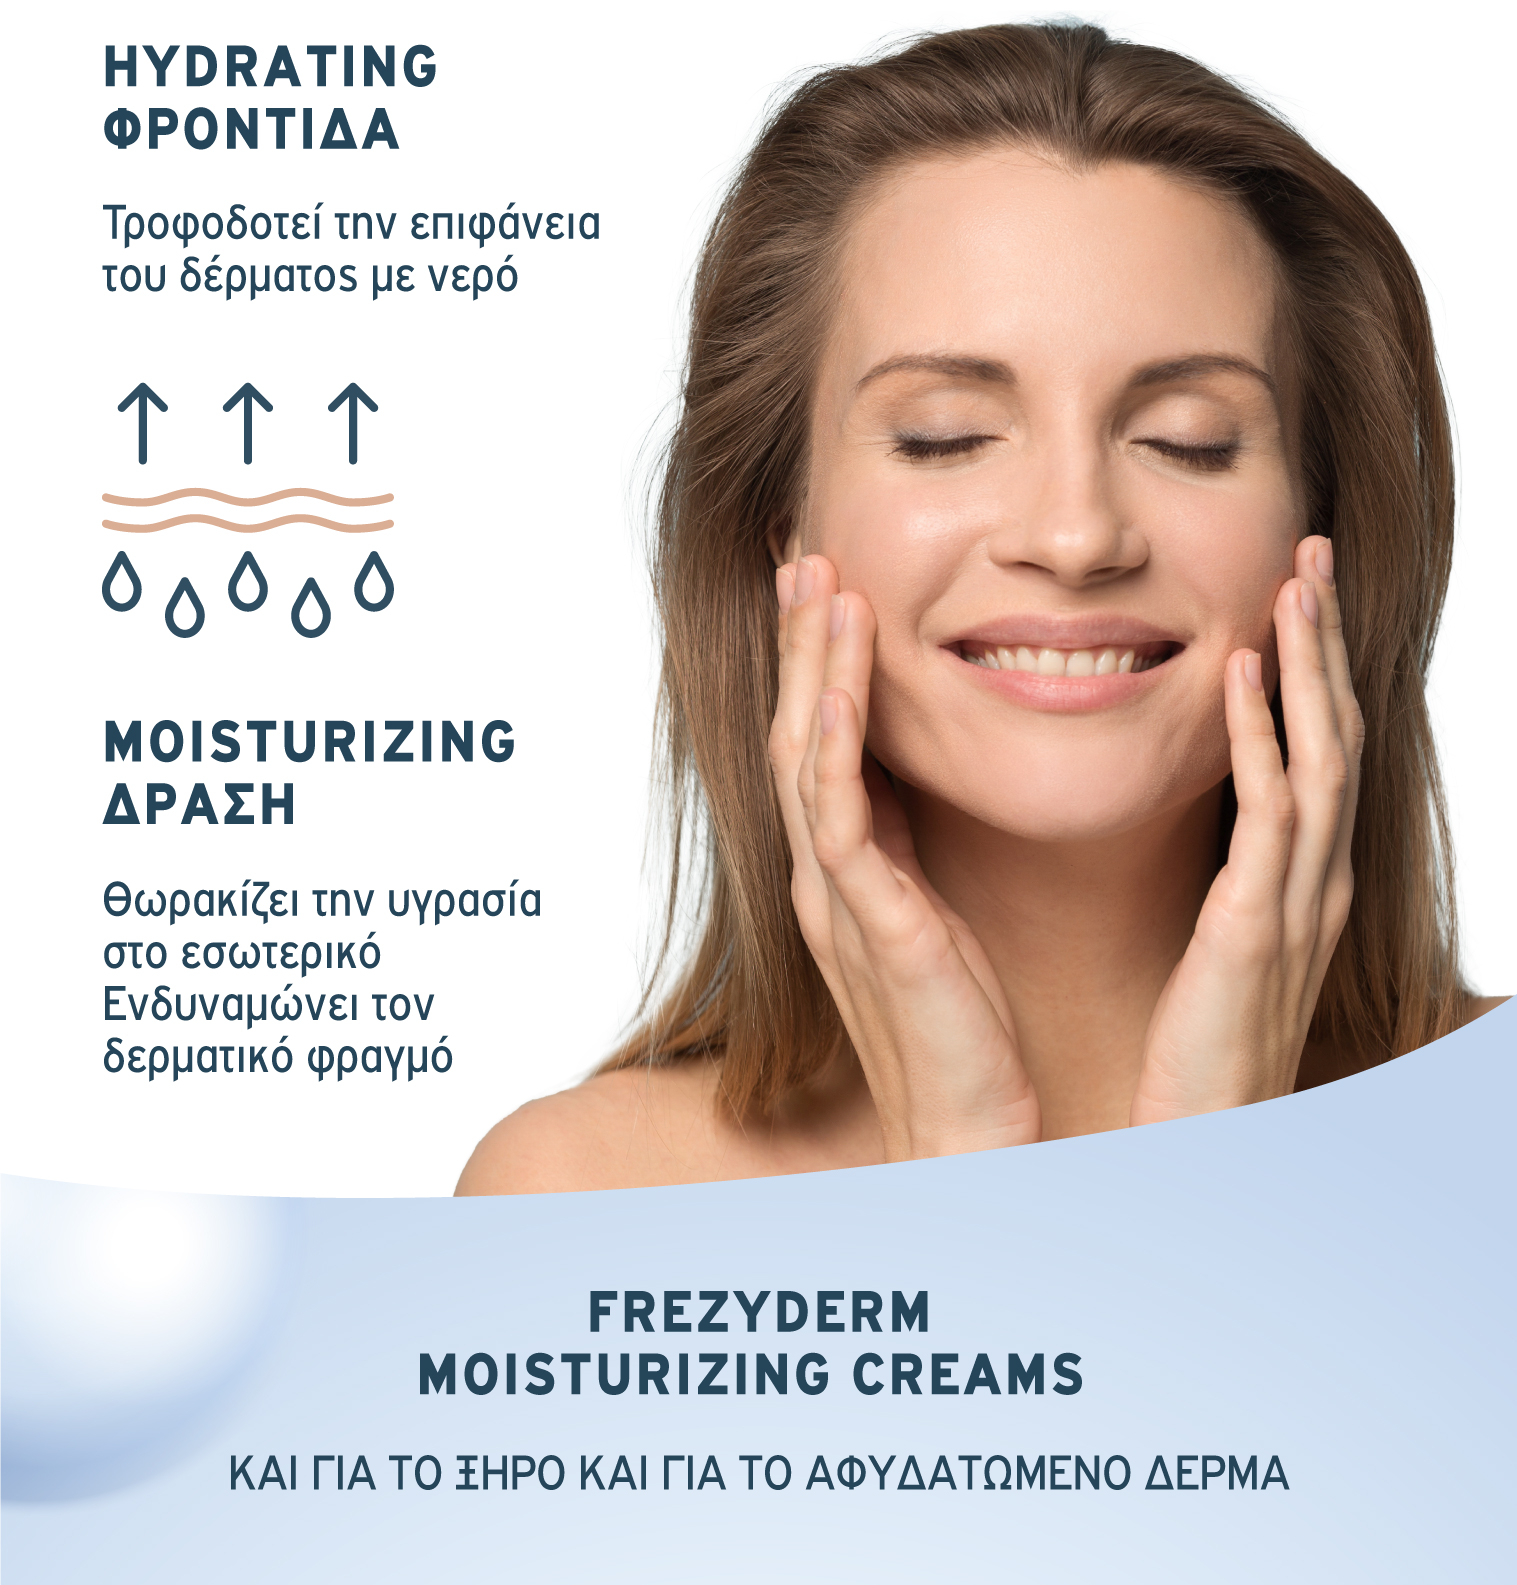 FREZYDERM INFOGRAPHIC MARCH 04